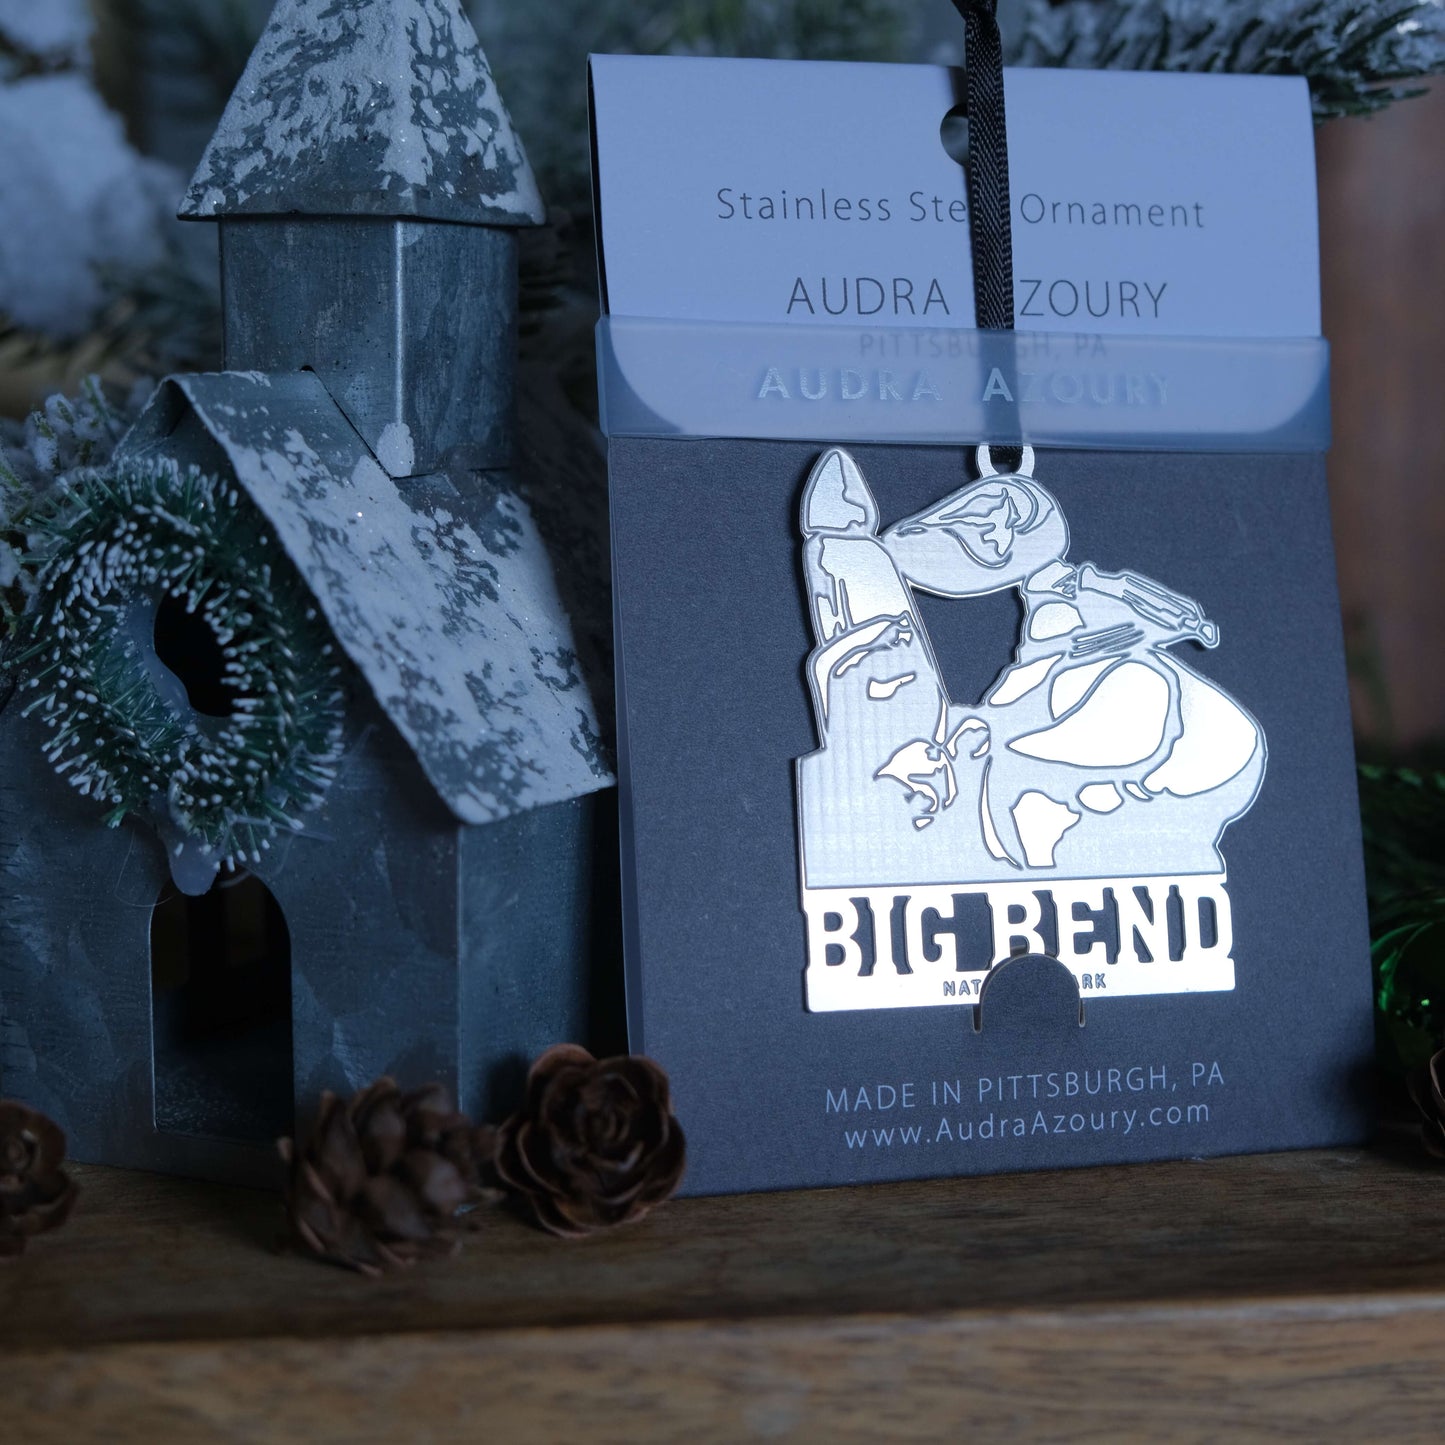 Big Bend National Park Ornament by Audra Azoury